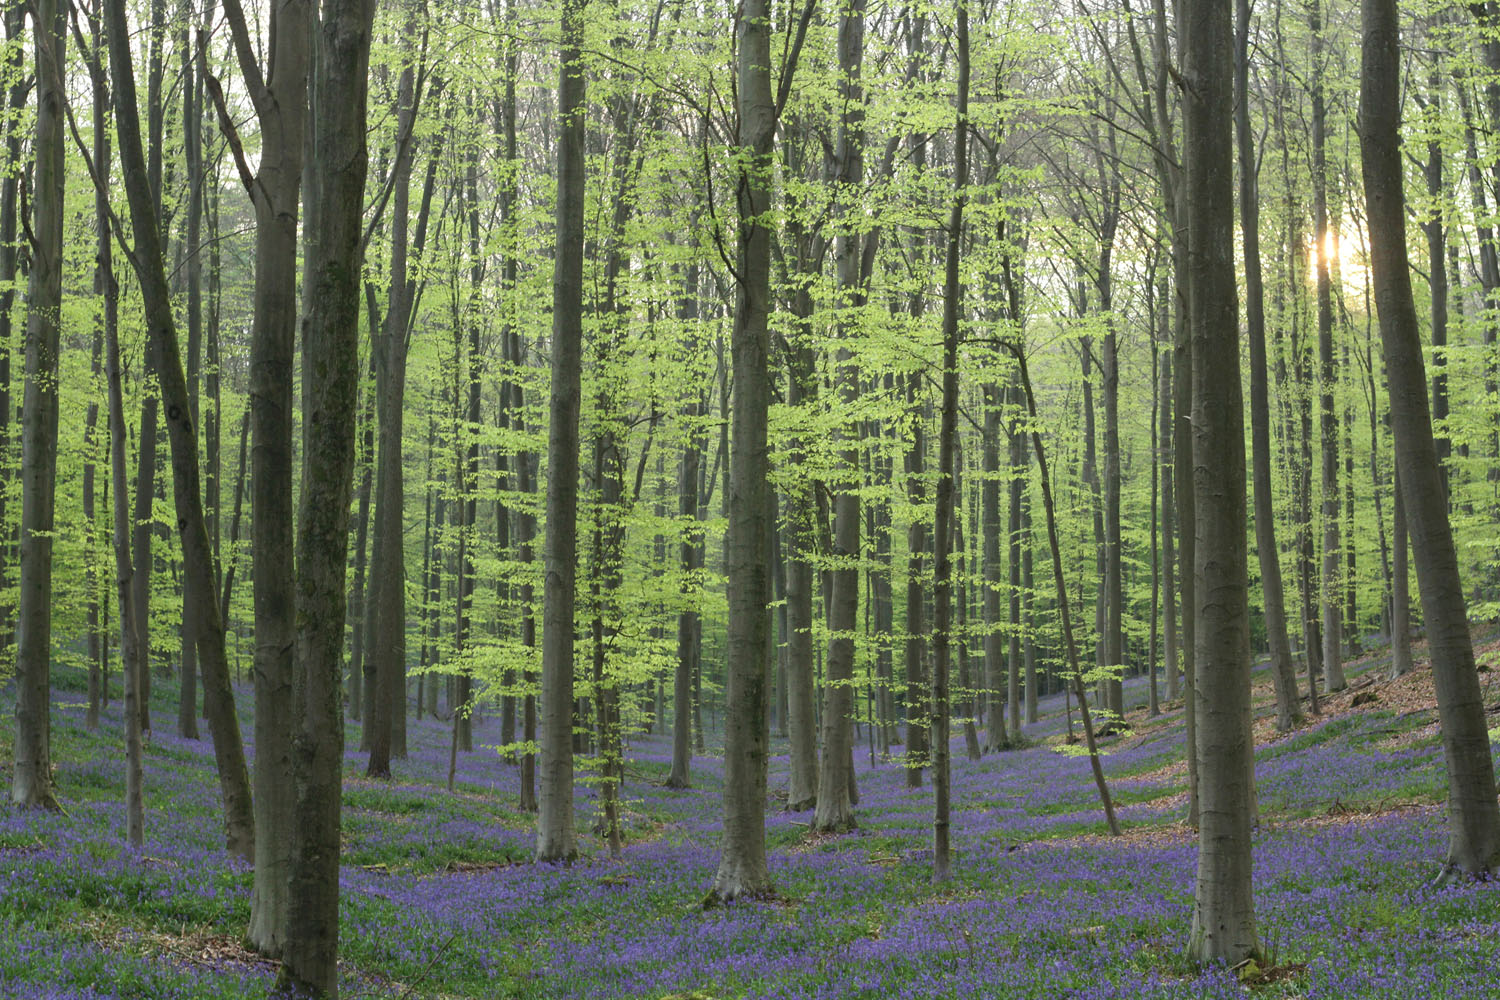 Hallerbos is a blue forest in Belgium.